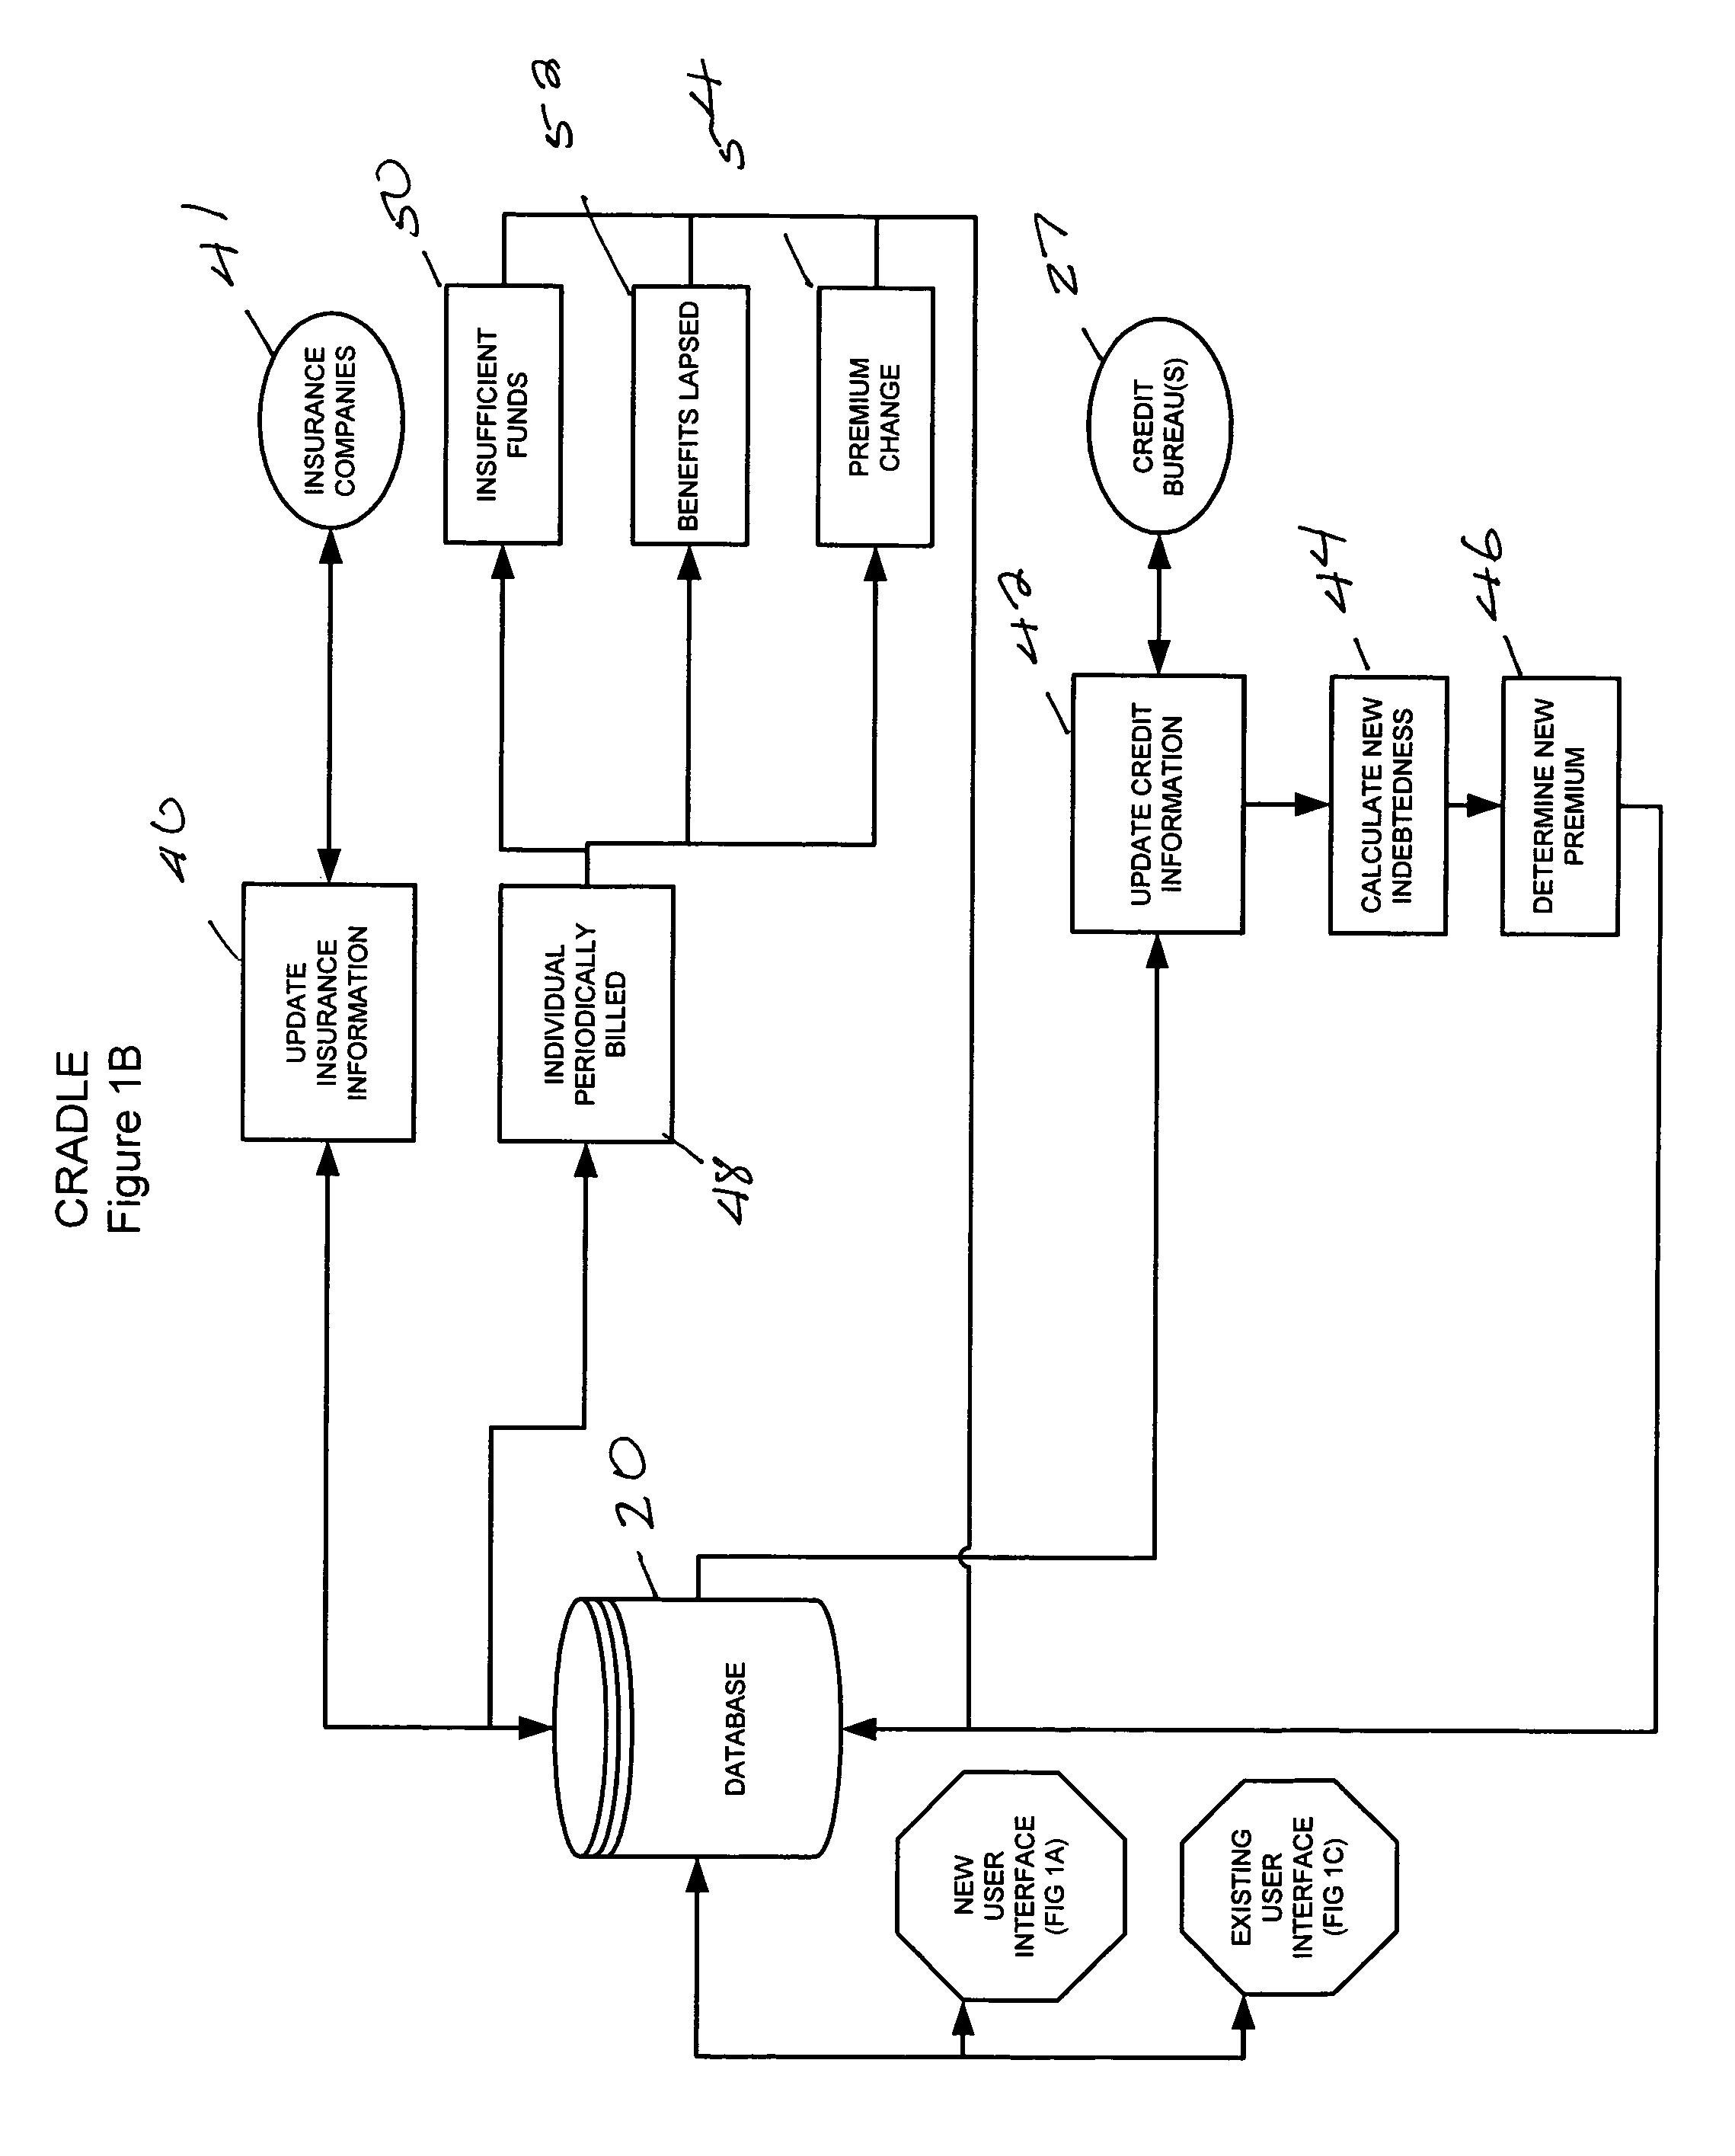 Method for determining insurance benefits and premiums from credit information